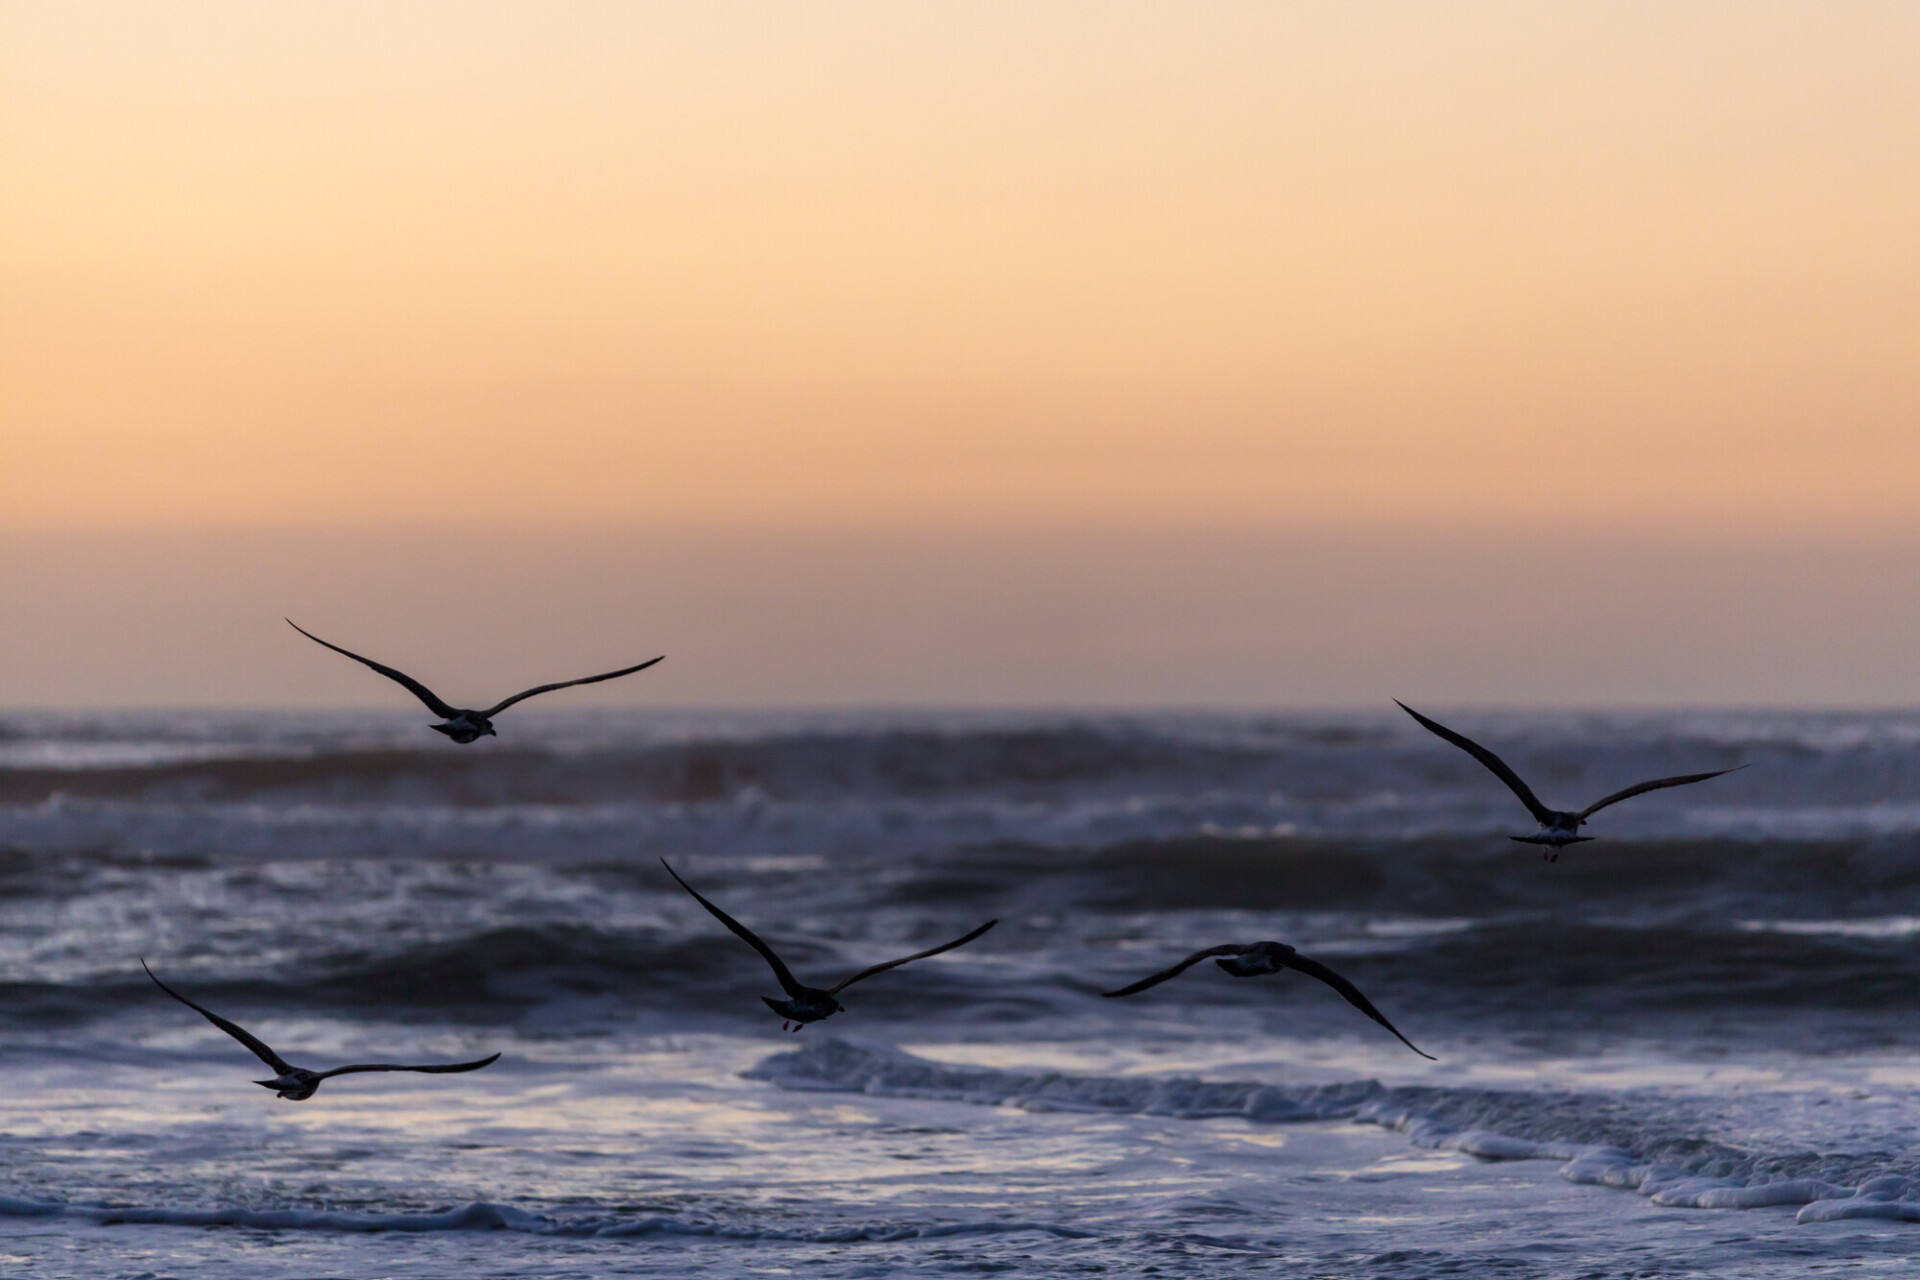 Seagulls flying over the waves of the sea